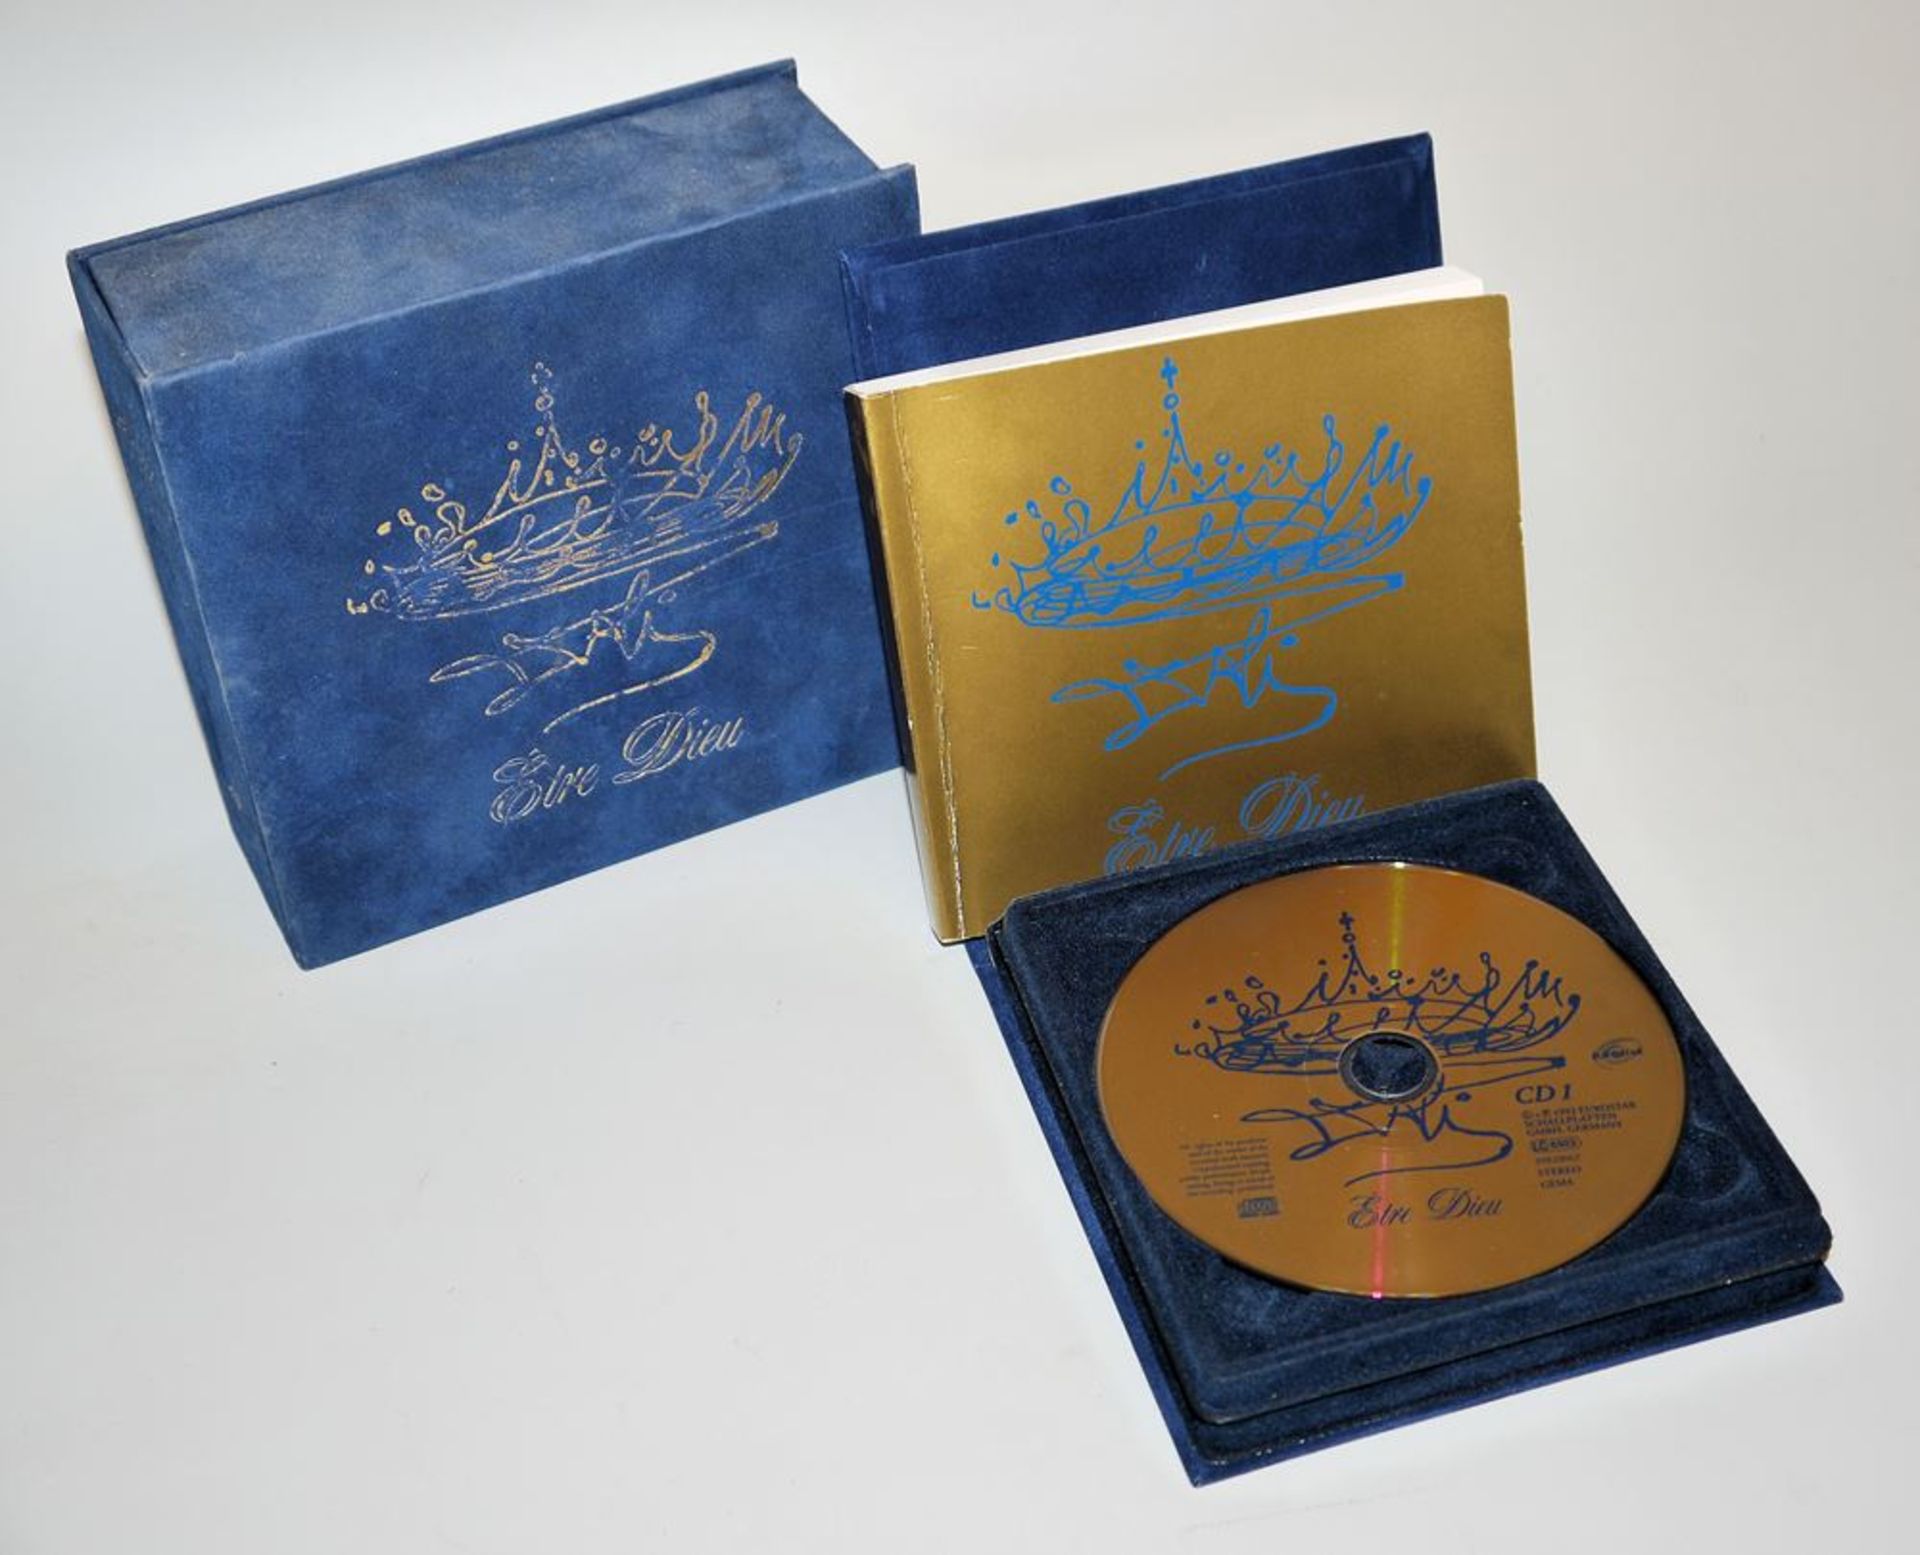 Salvador Dalí, "Être Dieu", Boxset with 3 CDs and book from 1992